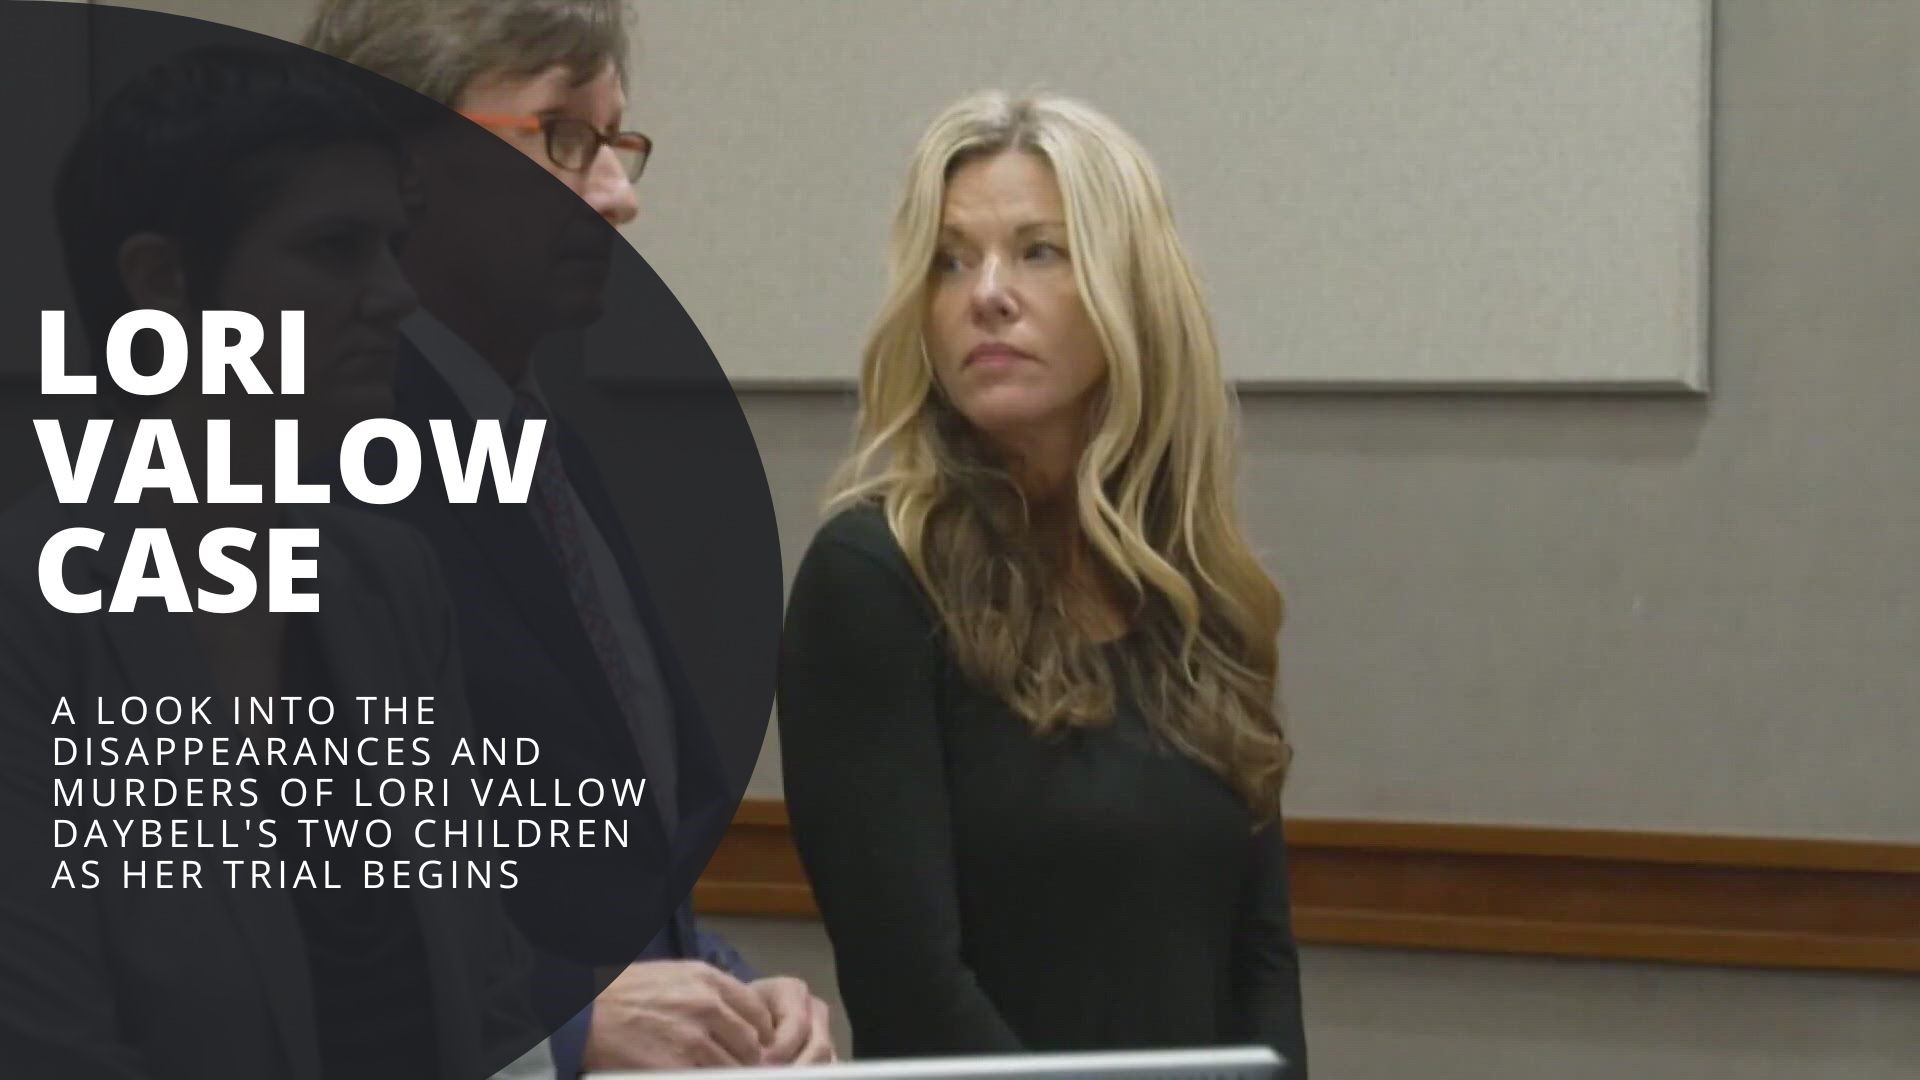 The murder trial in the Lori Vallow Daybell case begins soon. We take a look inside the case.